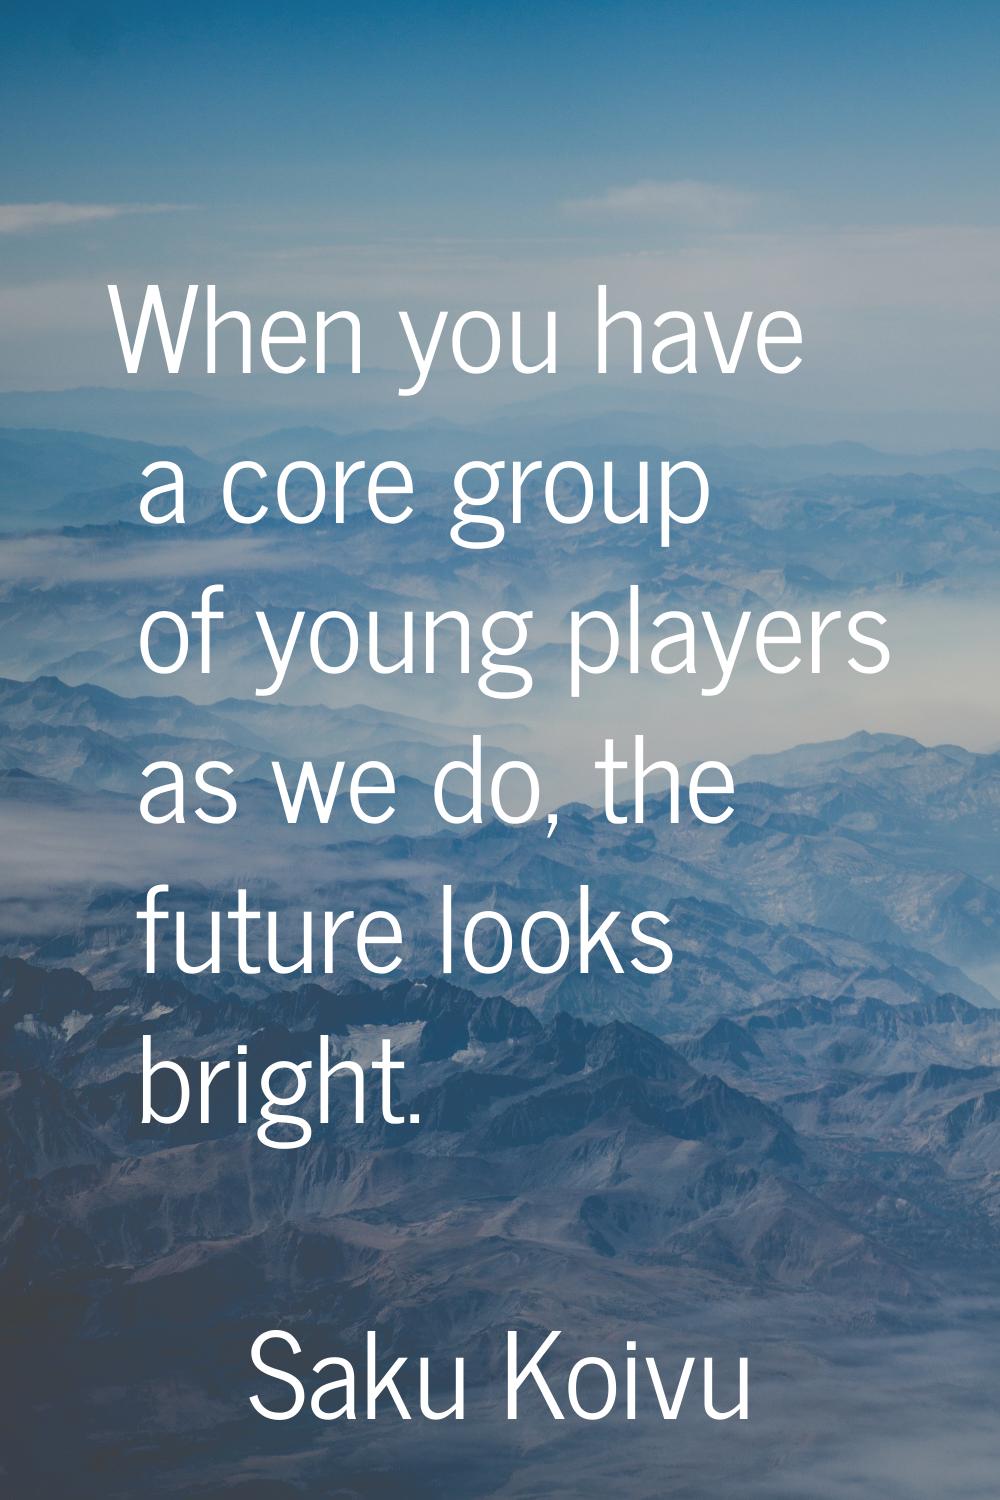 When you have a core group of young players as we do, the future looks bright.